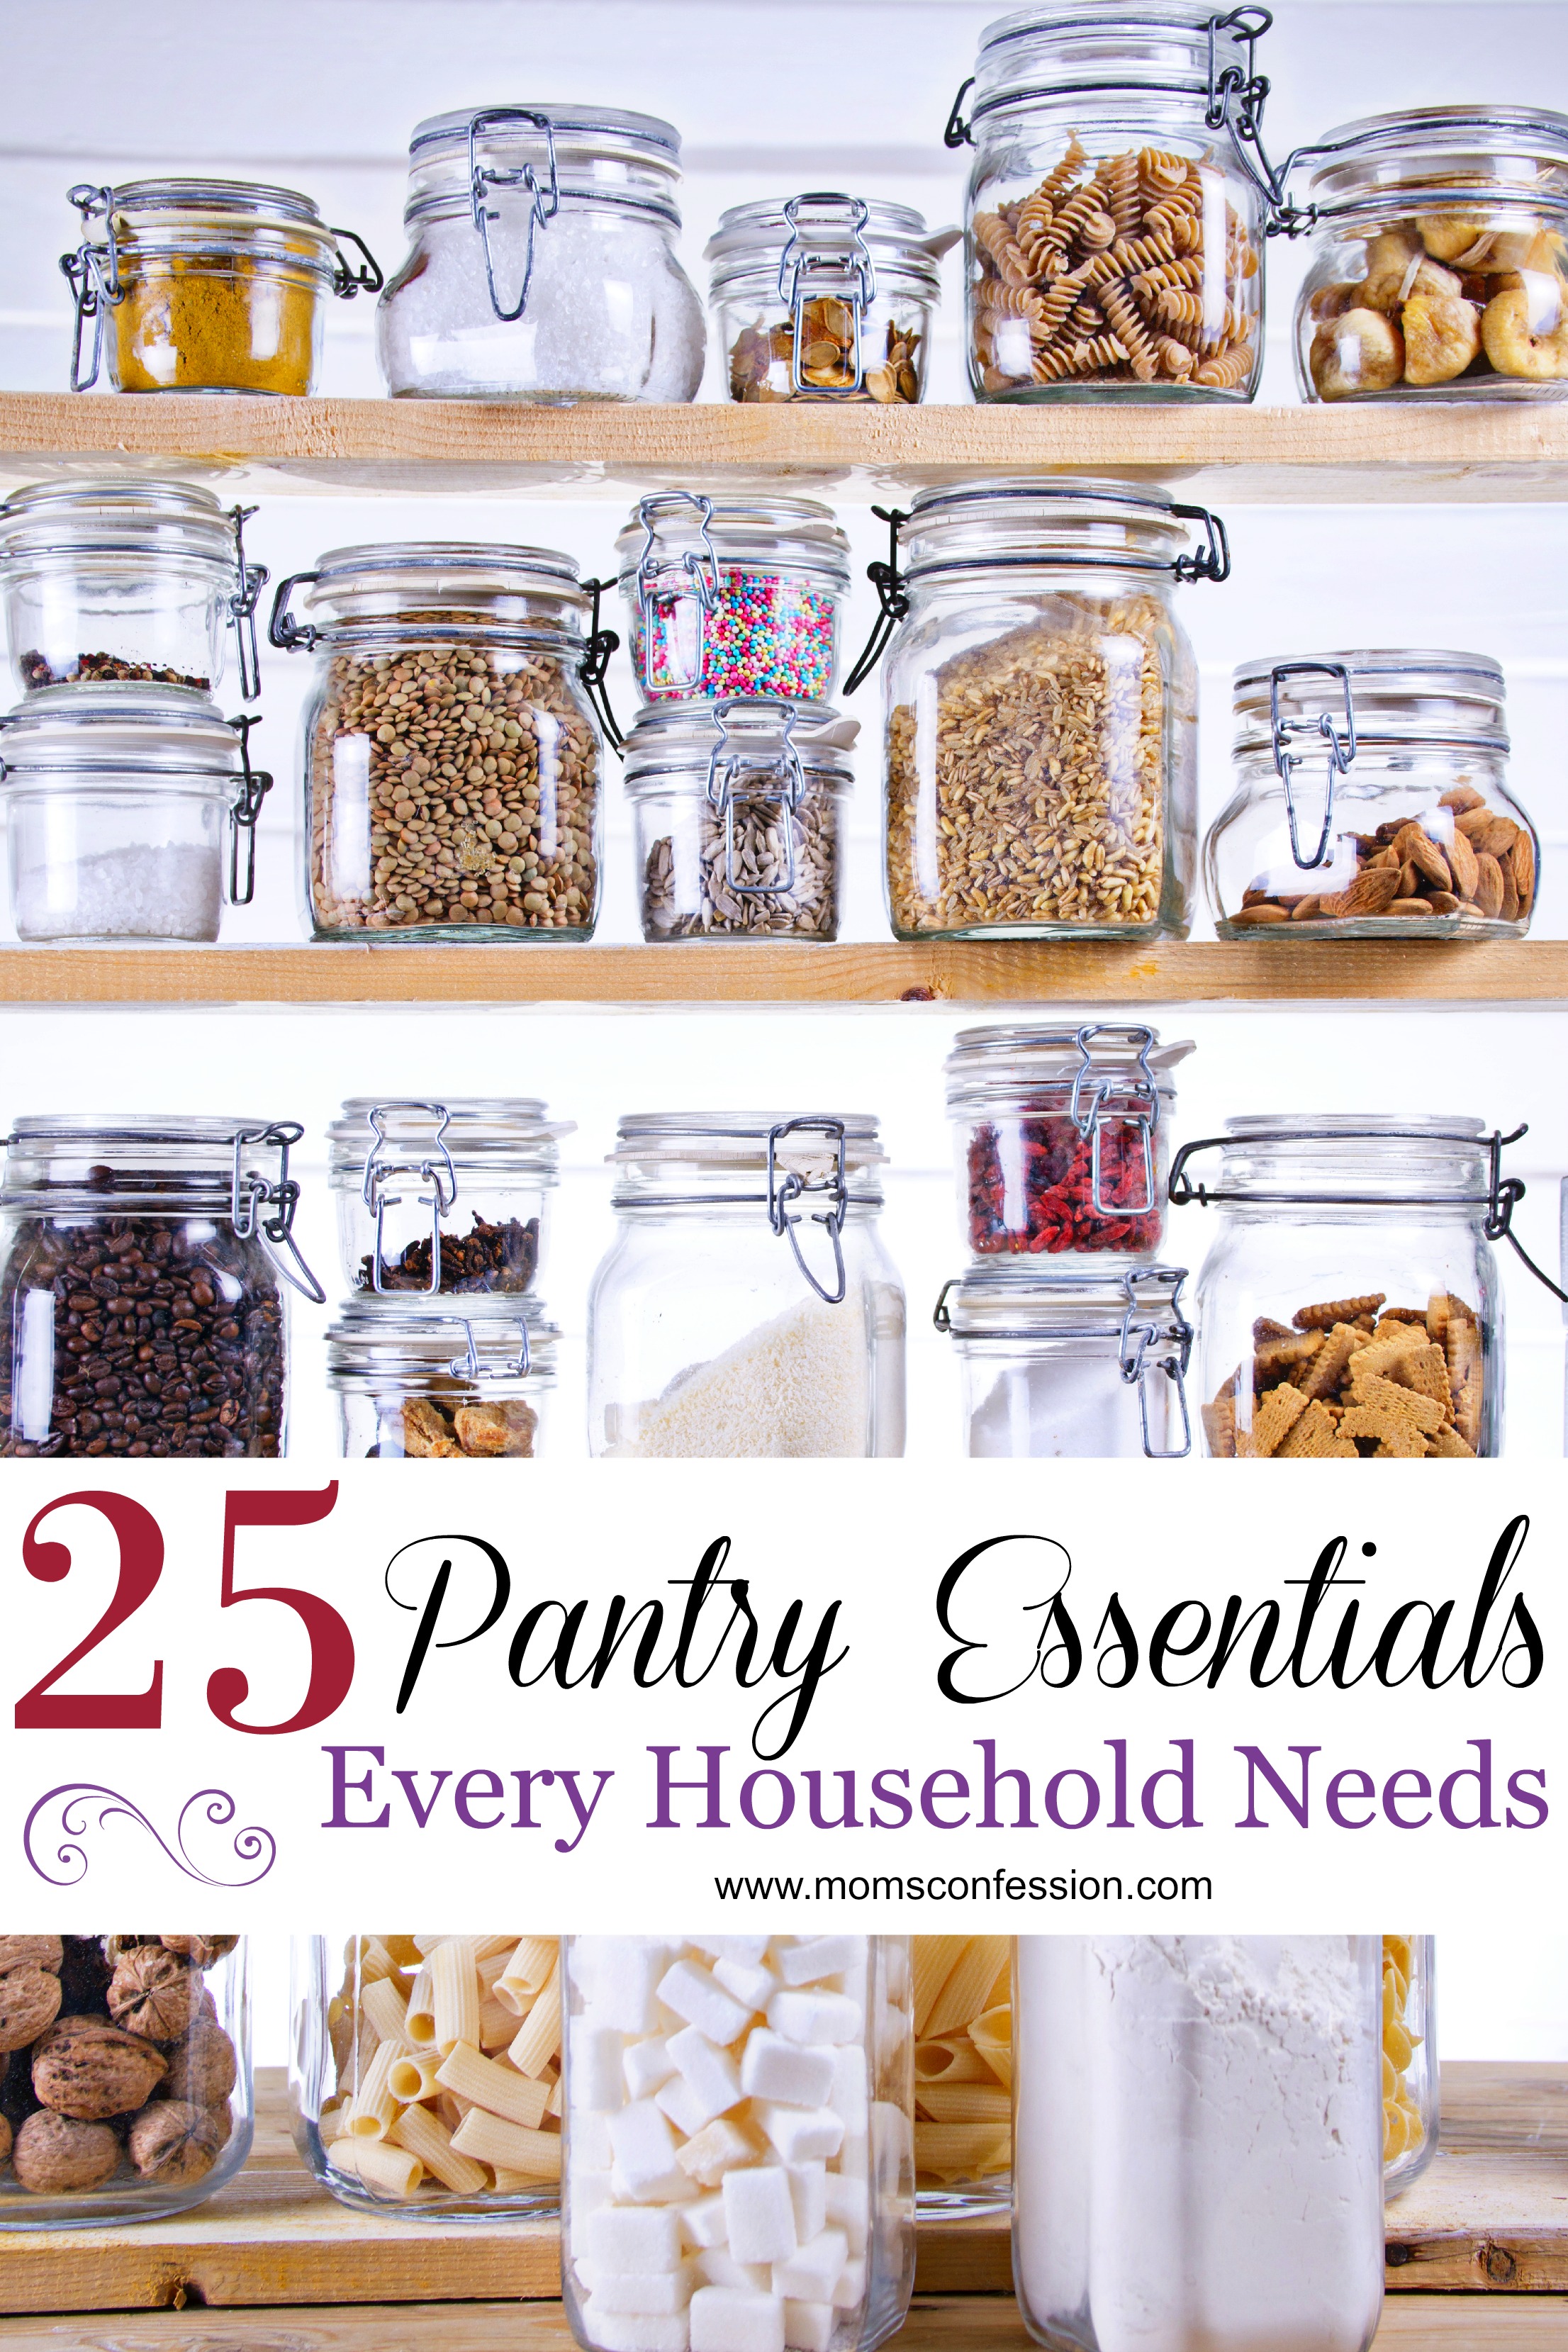 Kitchen Hacks: 25 Pantry Staples Every Household Needs